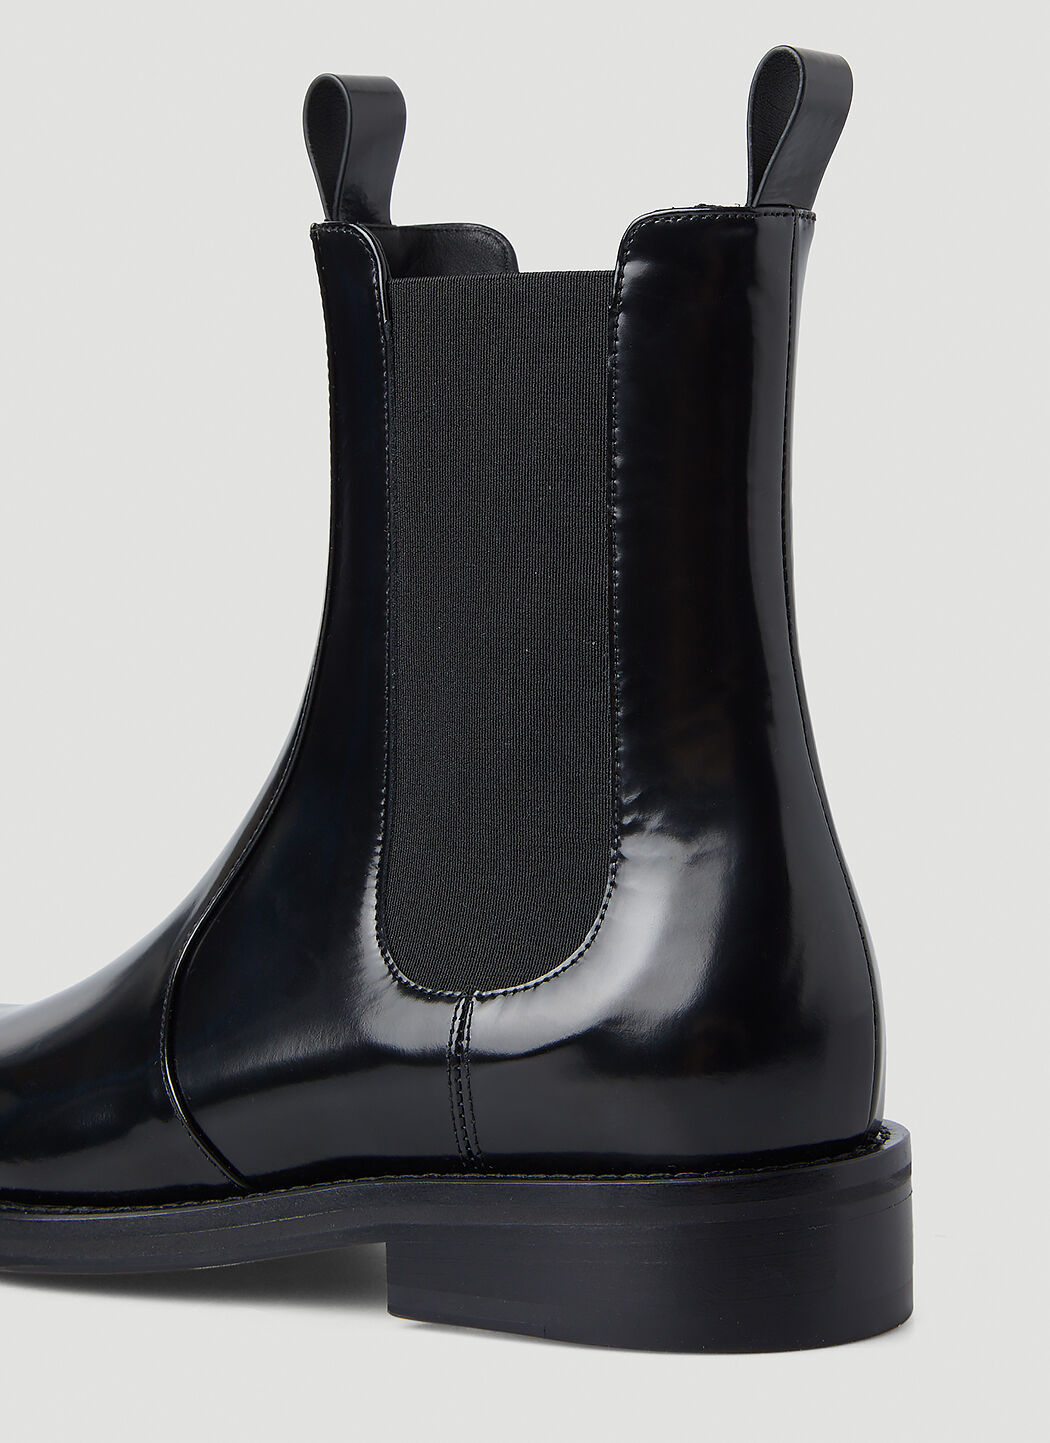 Martine Rose Chisel Toe Chelsea Boots in Black | LN-CC®